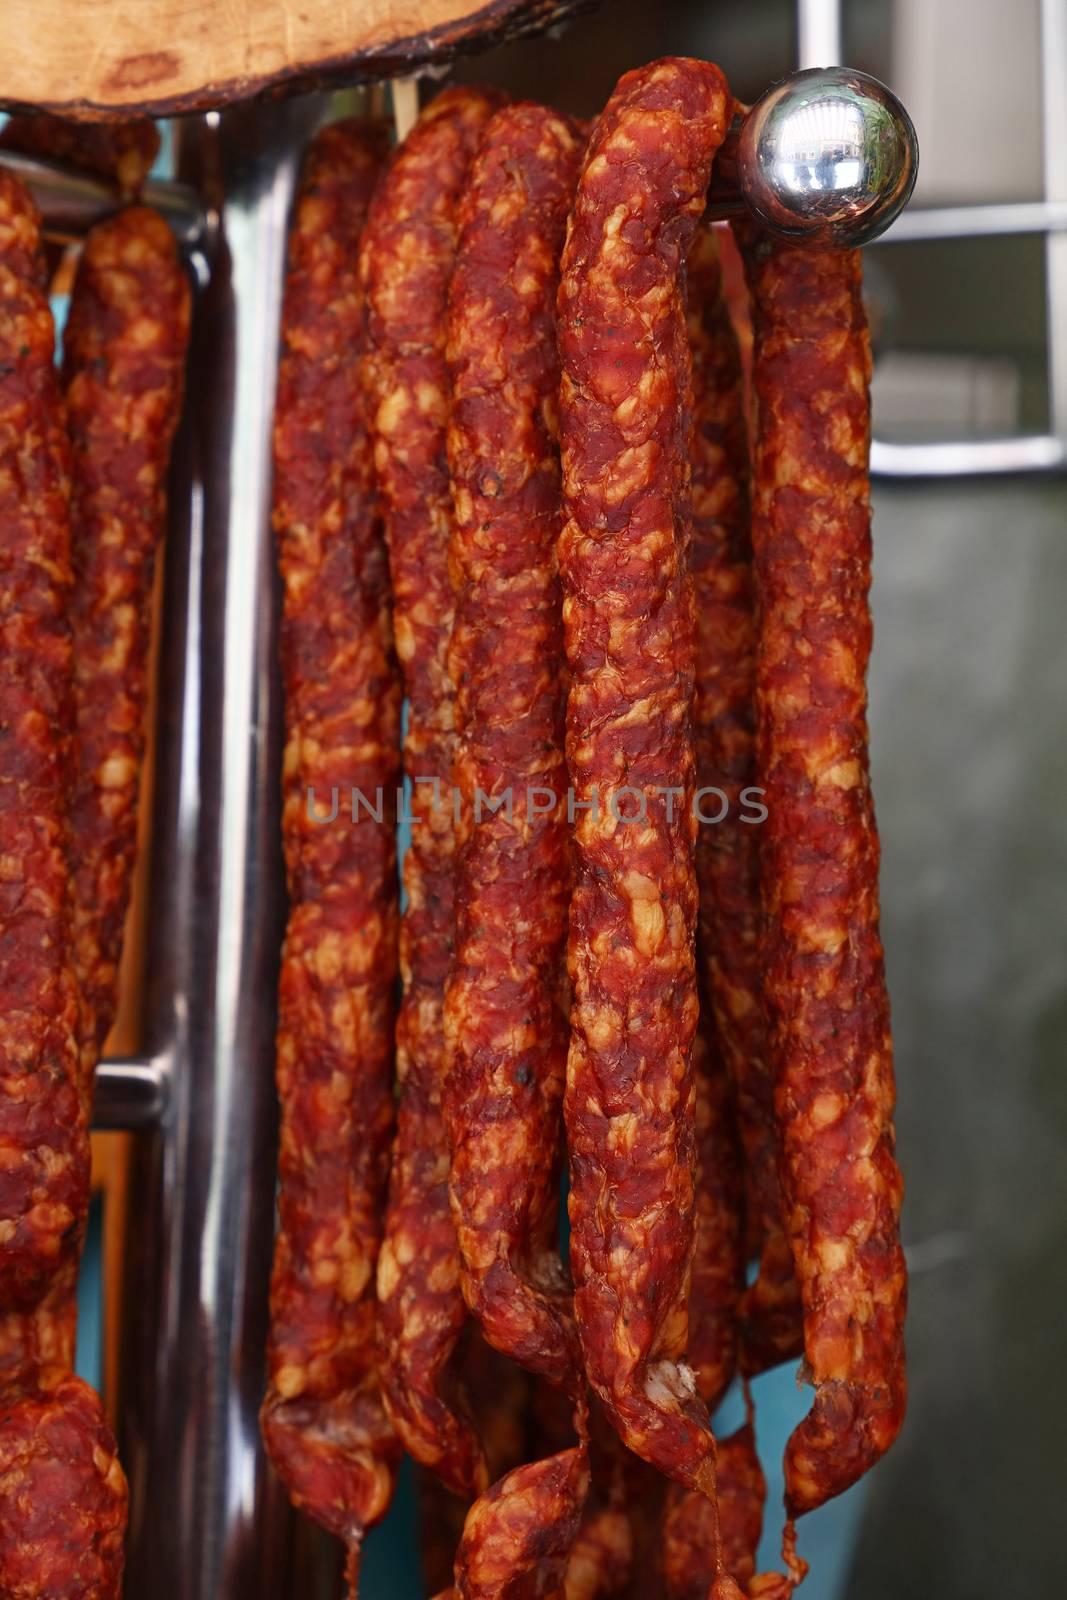 Close up cured smoked dried assorted homemade artisan red pork meat sausages hanging in retail market store display, low angle view